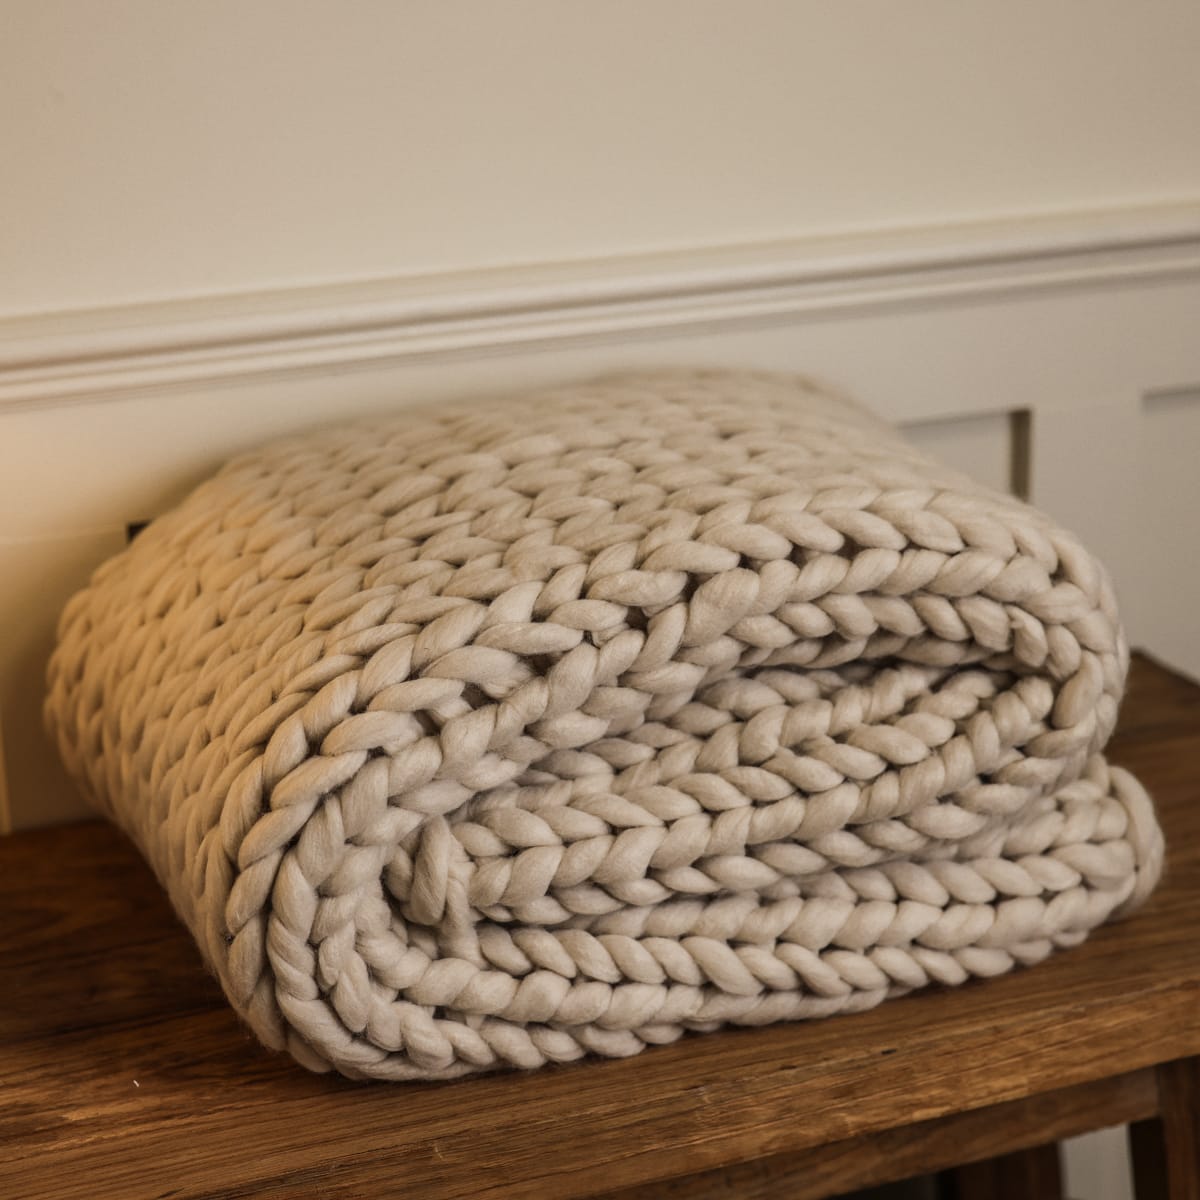 Chunky knit blanket folded up on a wooden console side view.